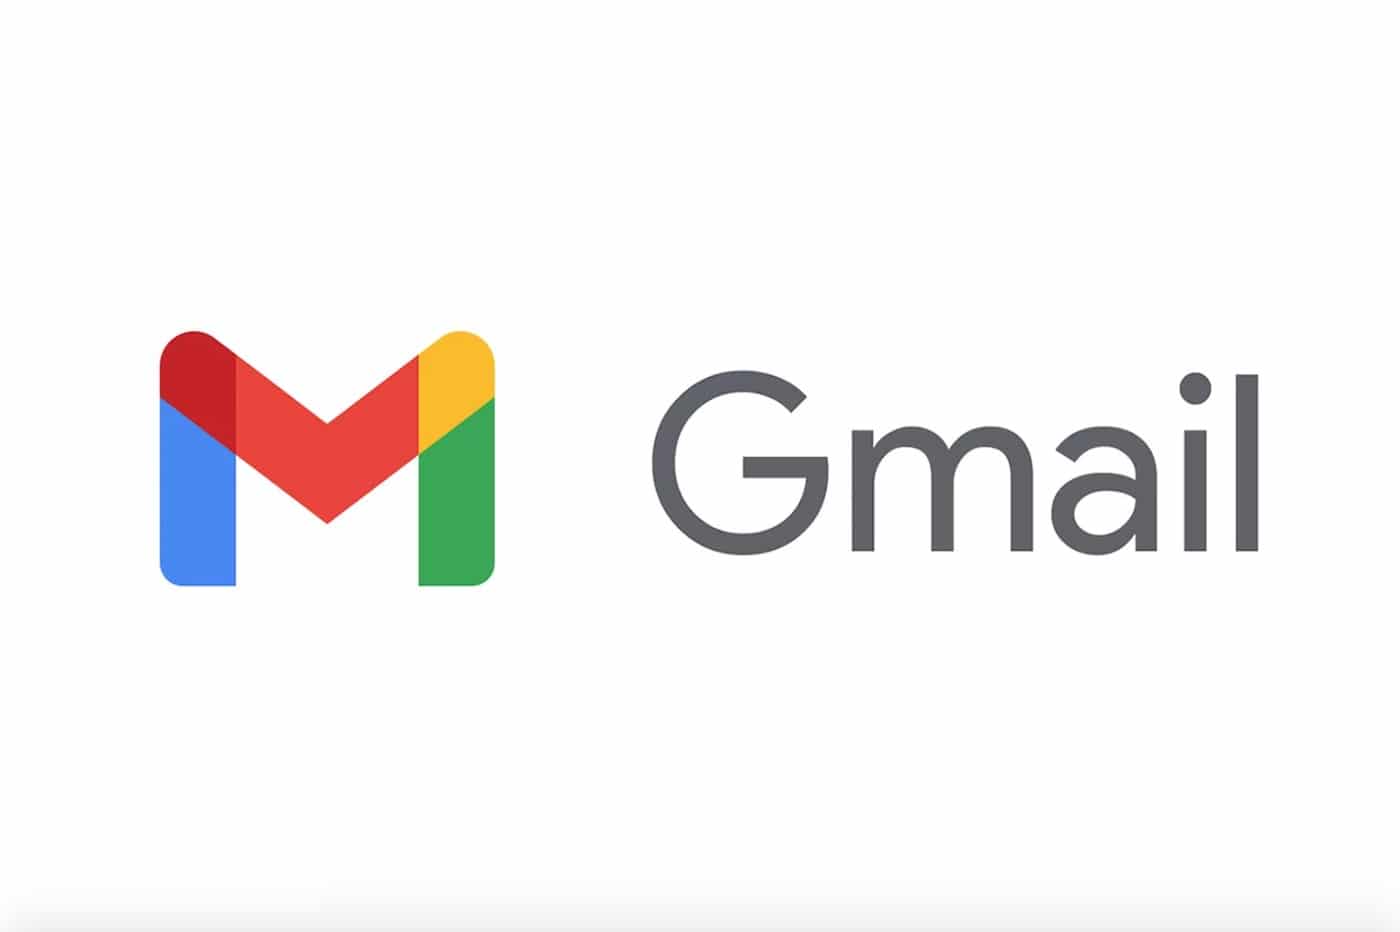 Searching for emails on a smartphone in Gmail will become much better, but it's not certain